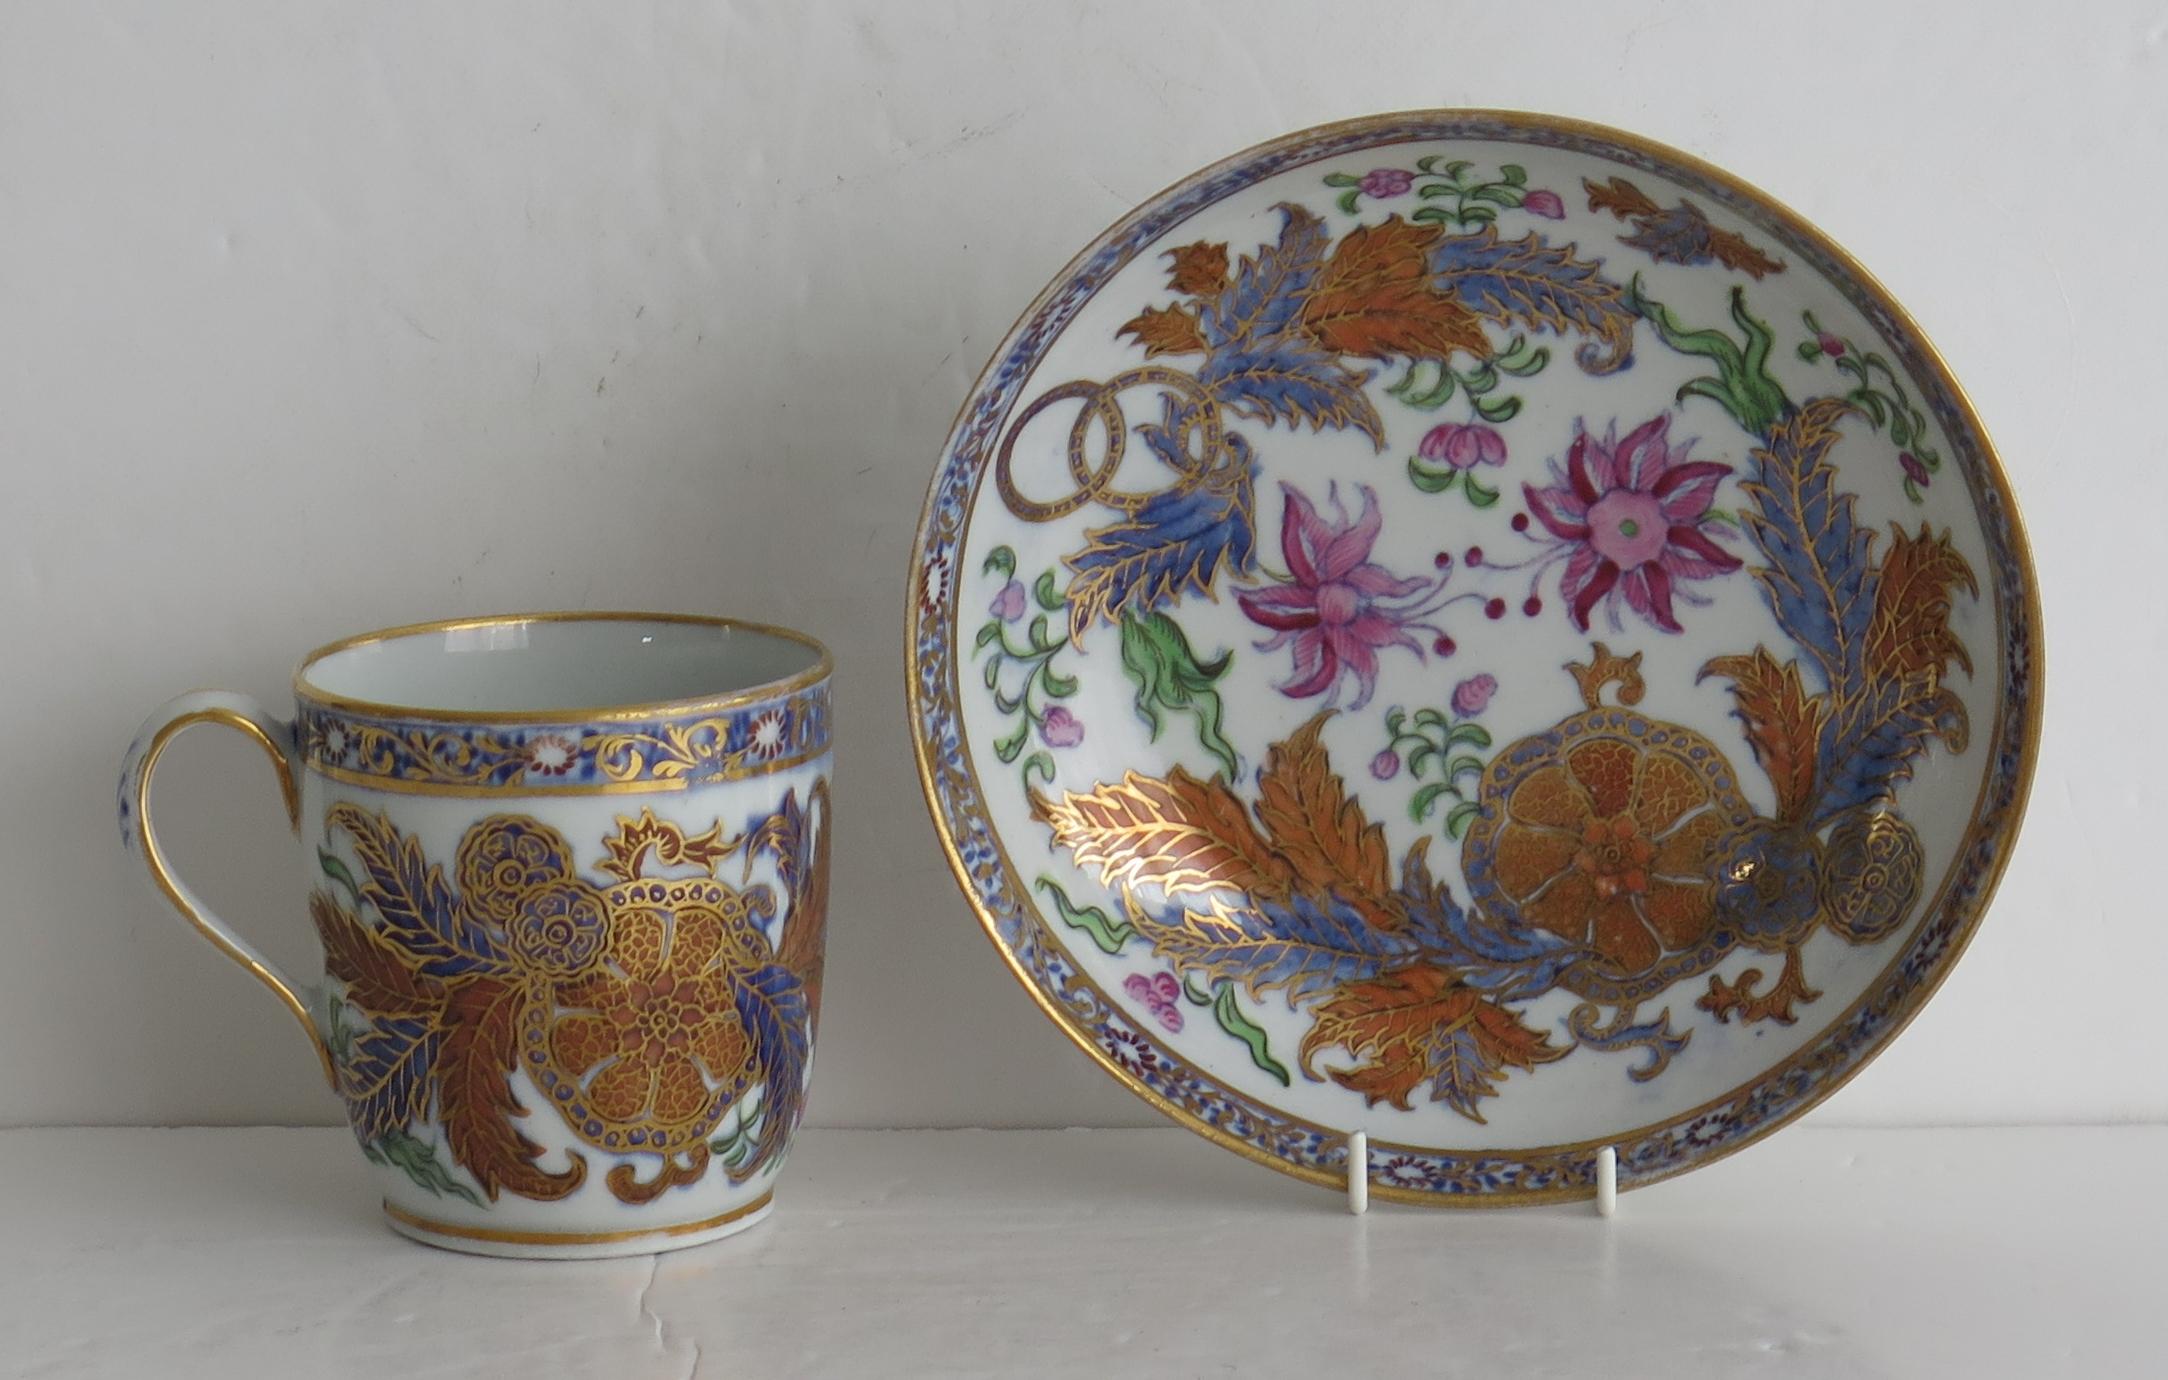 This is a finely decorated porcelain coffee cup and saucer, by New Hall in pattern 274, dating to the late 18th century George 111rd period, circa 1795.

Both pieces are well potted, the cup on a low foot with a plain loop handle.

They are